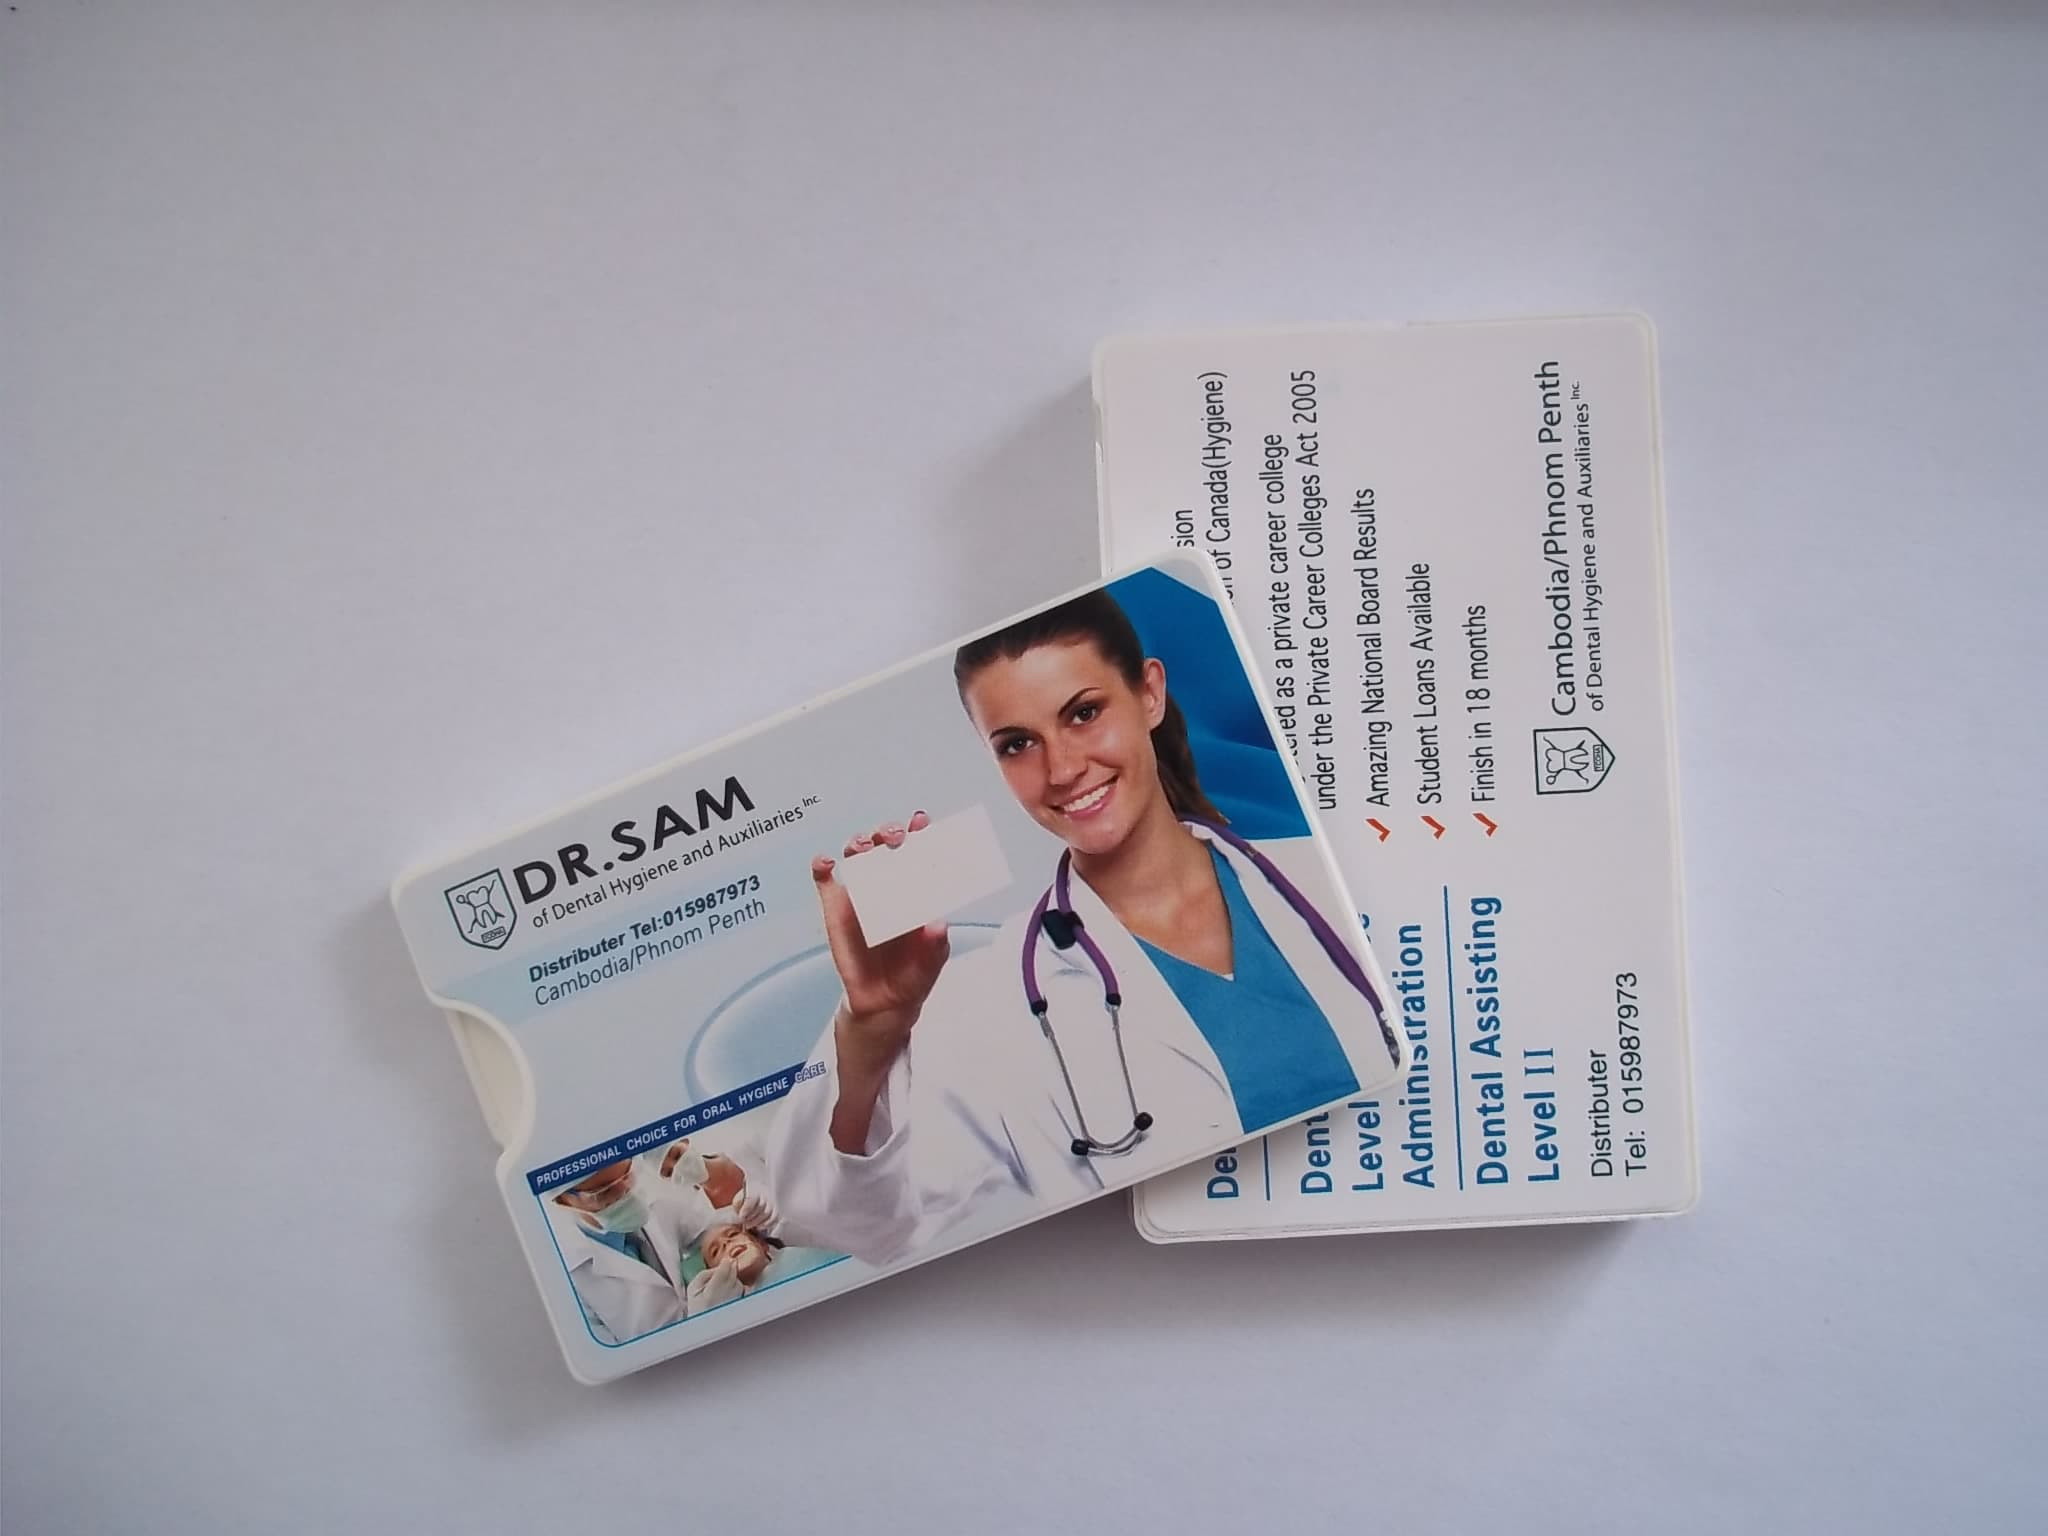 Business card dental floss for promotion using